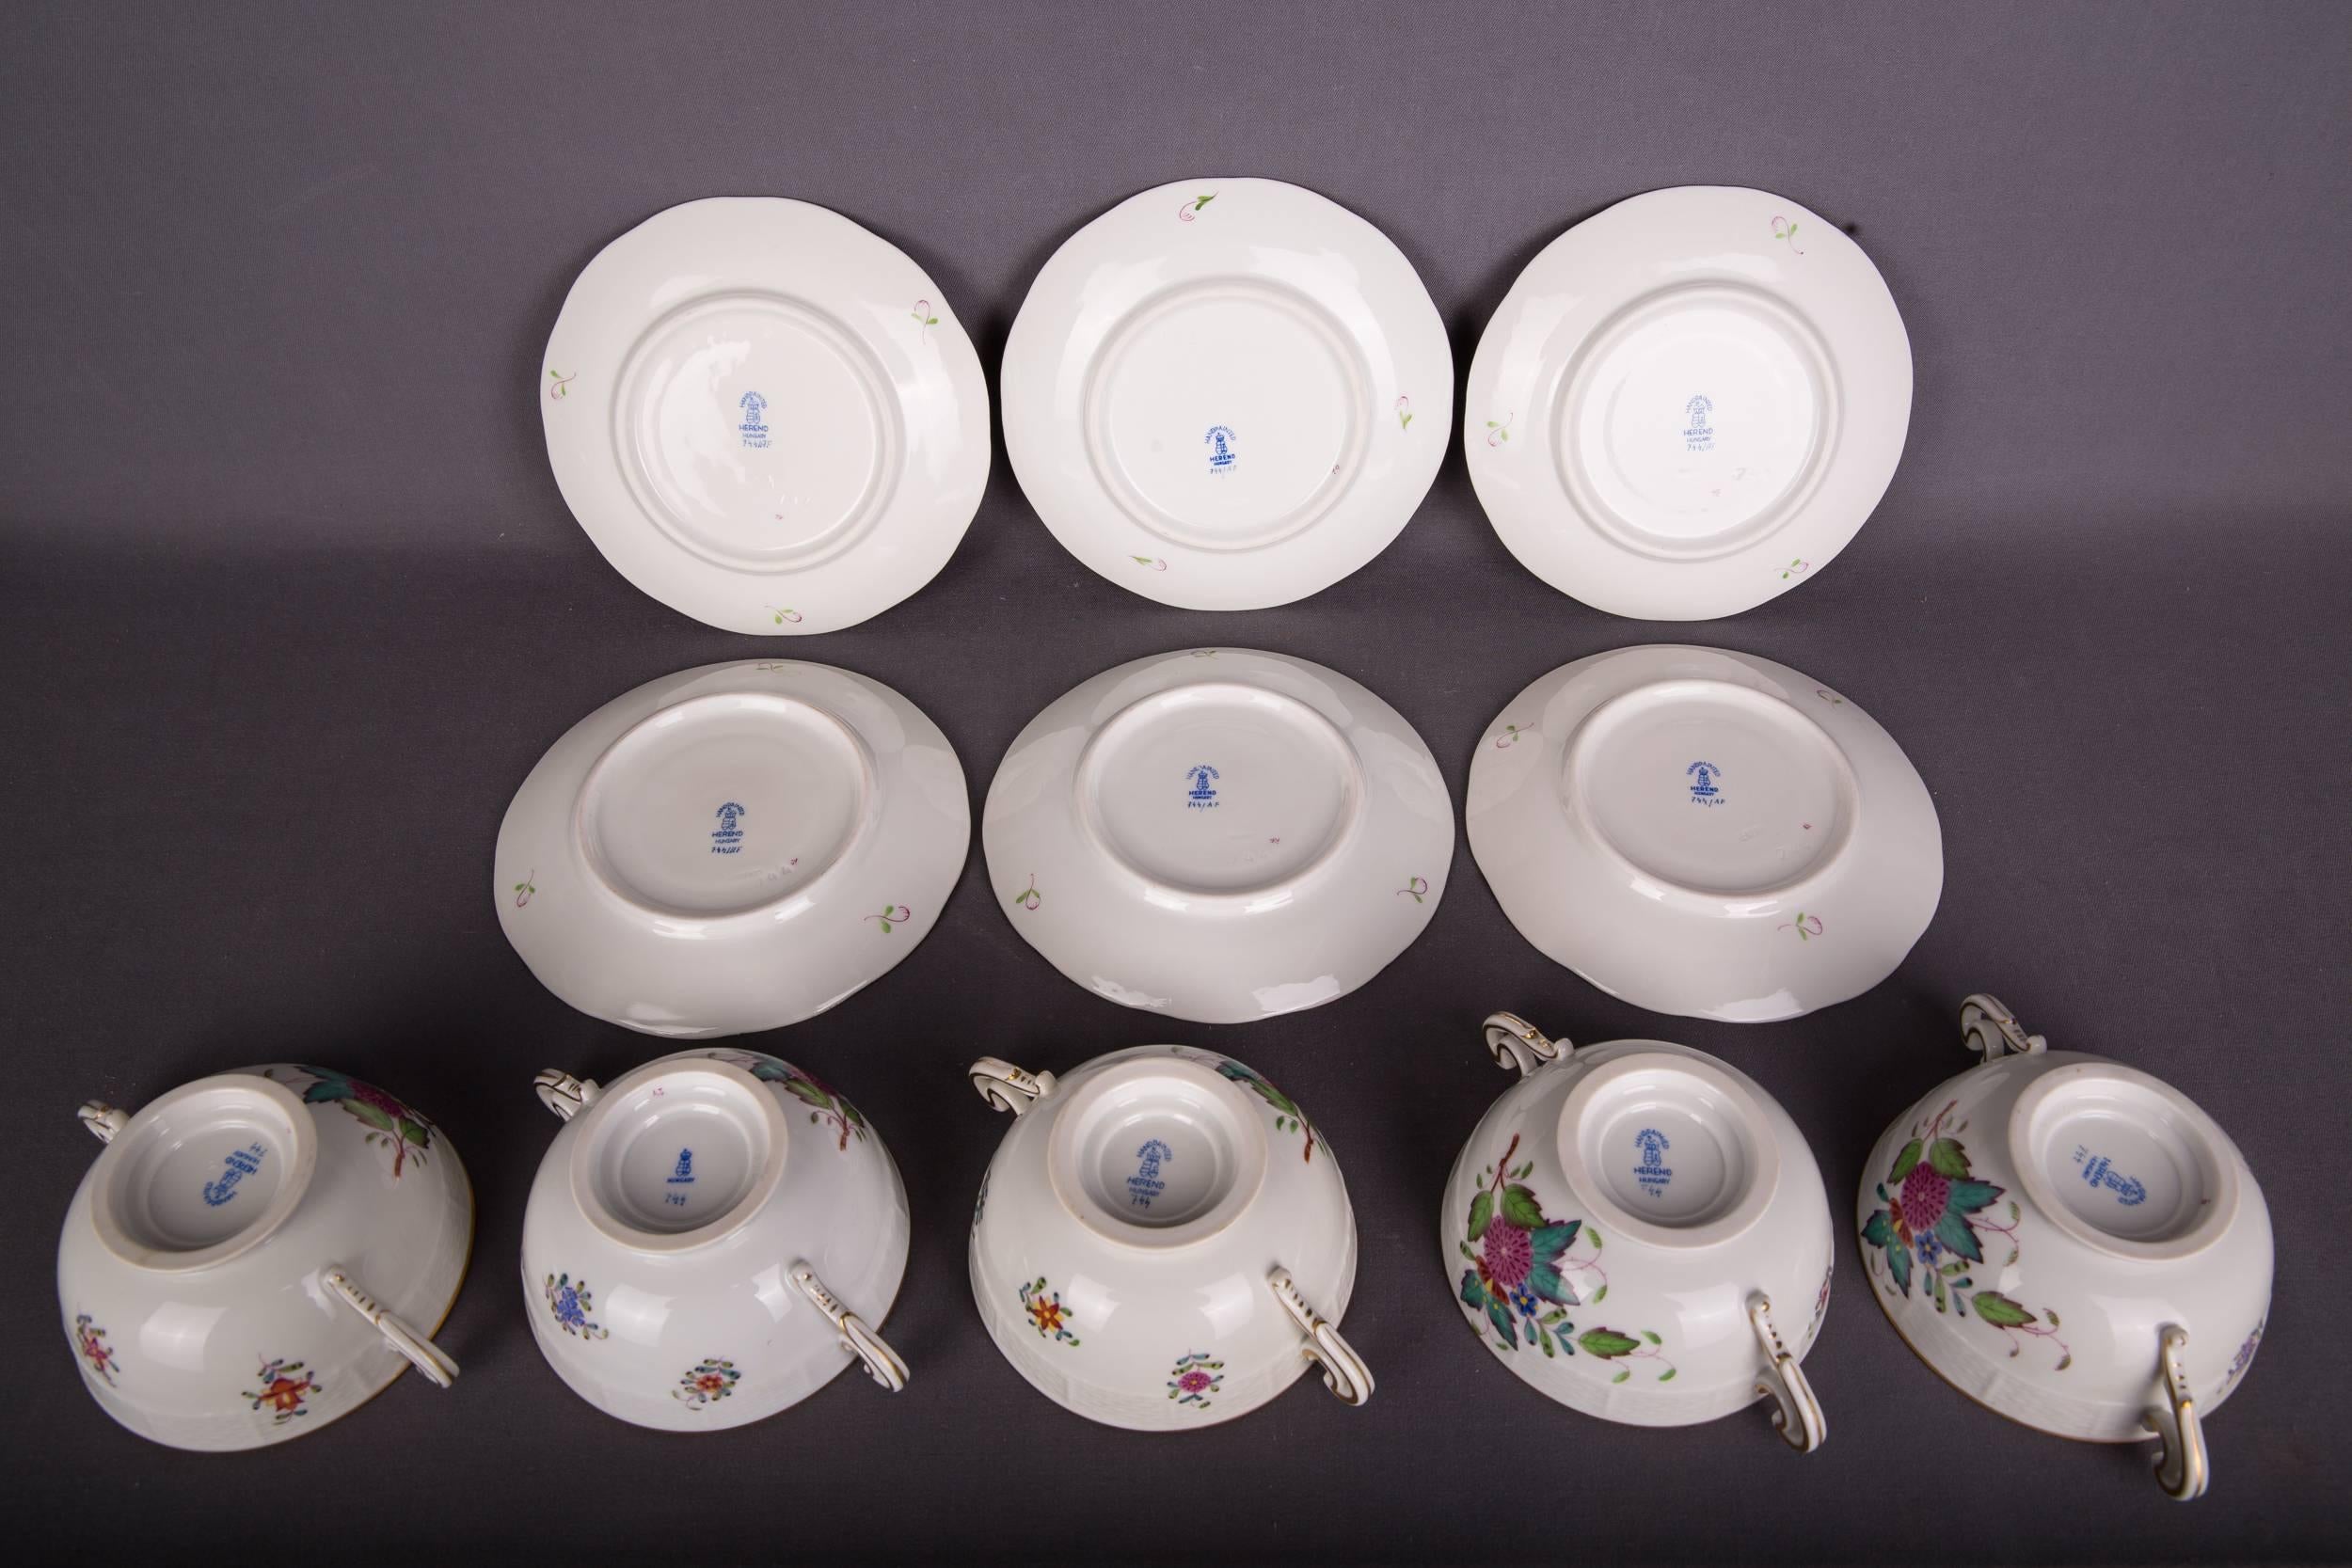 Extensive Rare Herend Dining Service Porcelain with a Lot of Flowers and Gold 3